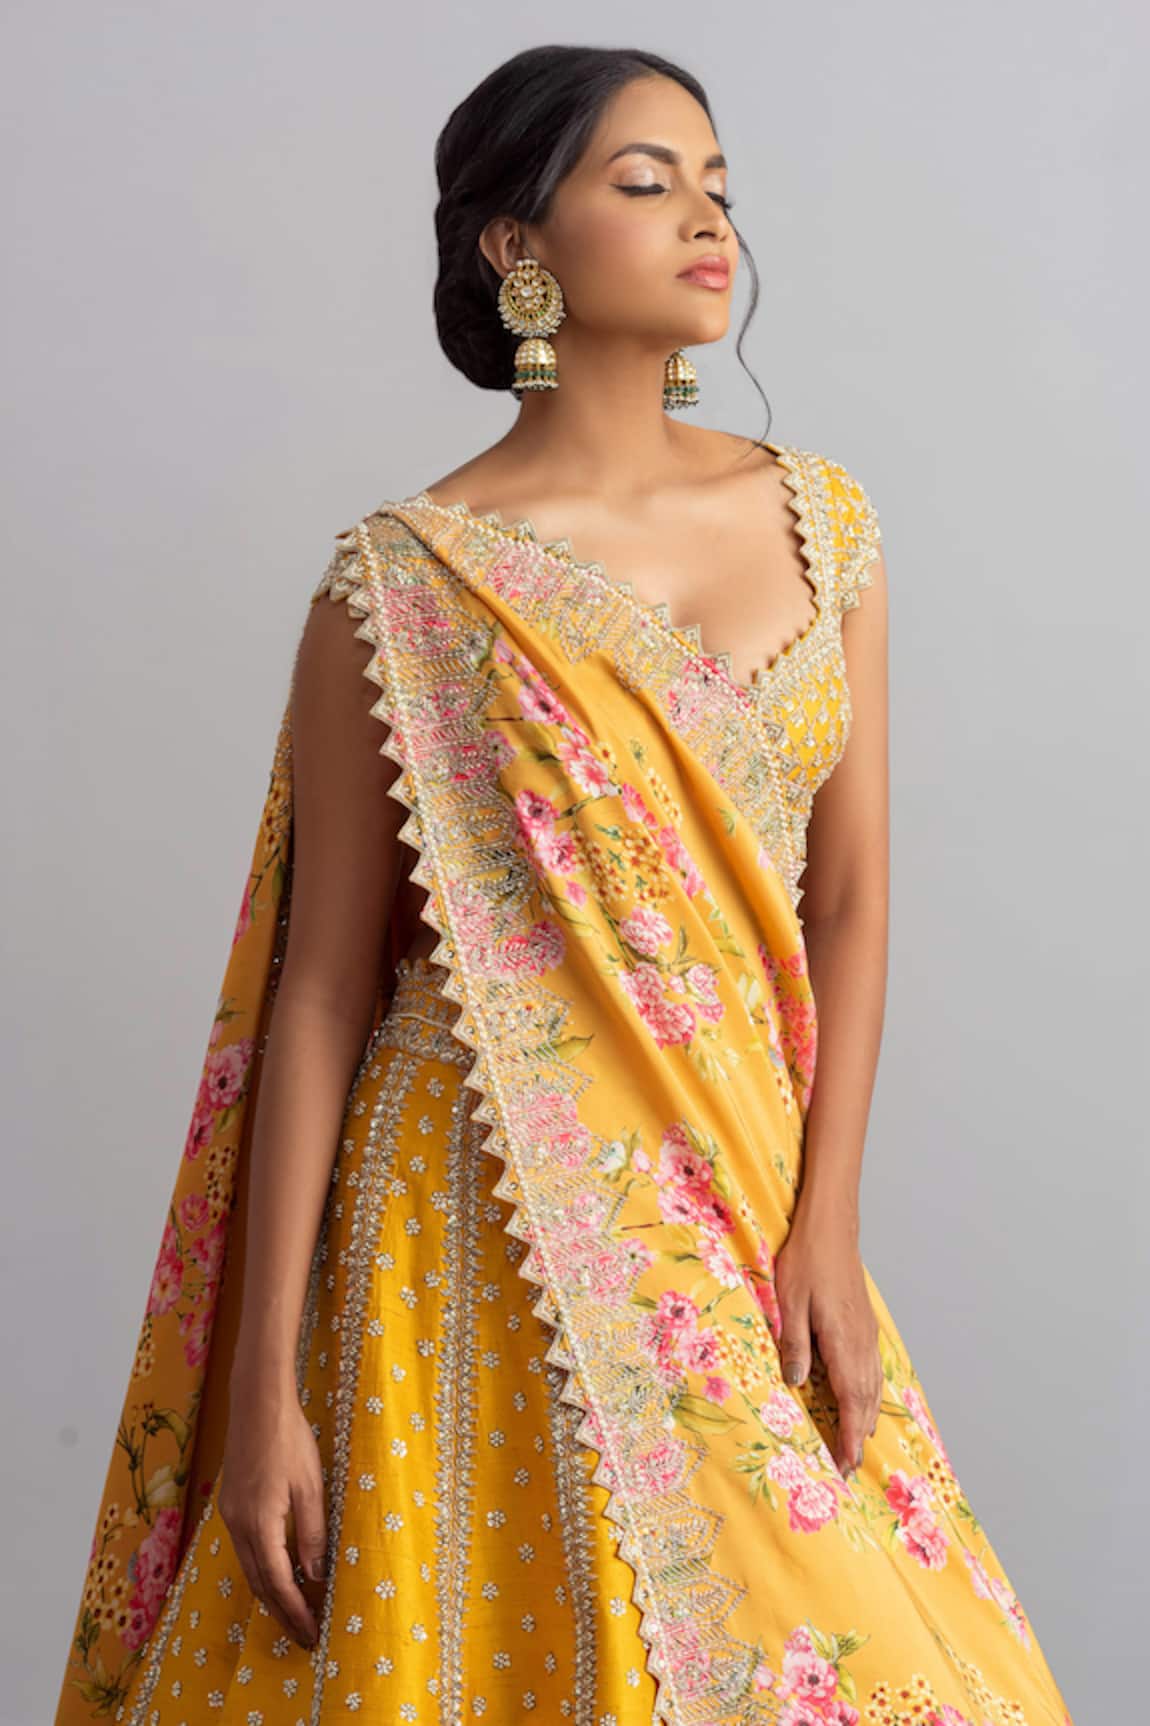 Anushree Reddy - Lemon Yellow organza lehenga with beadwork embroidery.  Paired with hand-embroidered elbow sleeve blouse and off-white tulle  dupatta. Explore #lehengas online www.shopanushreereddy.com . . . # AnushreeReddy #StayTuned #ShopOnline ...